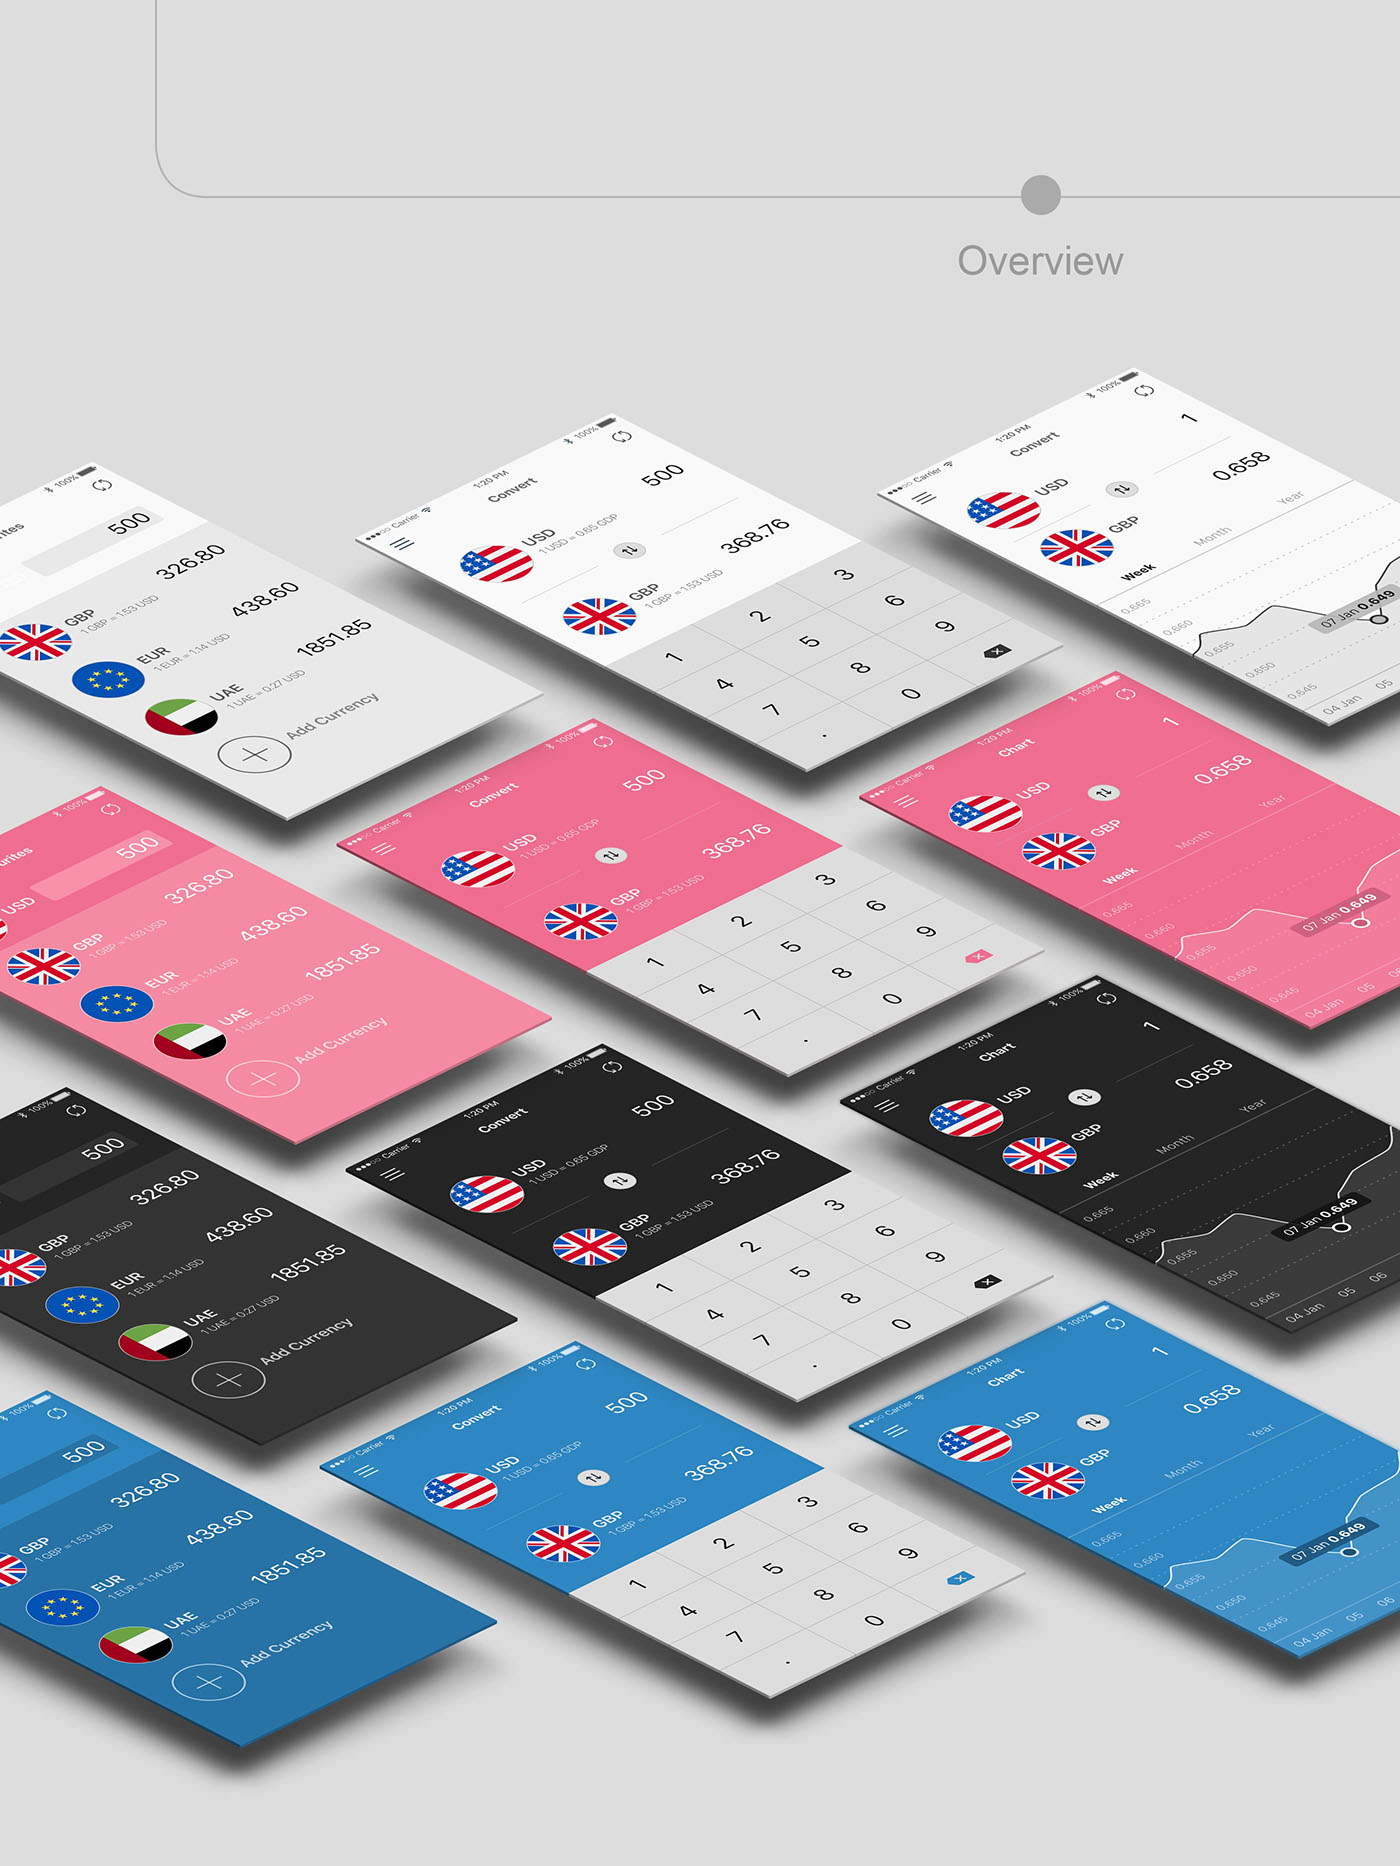 pink blue black interaction currency mobile design Mobile app iOS App Converter iPhone x